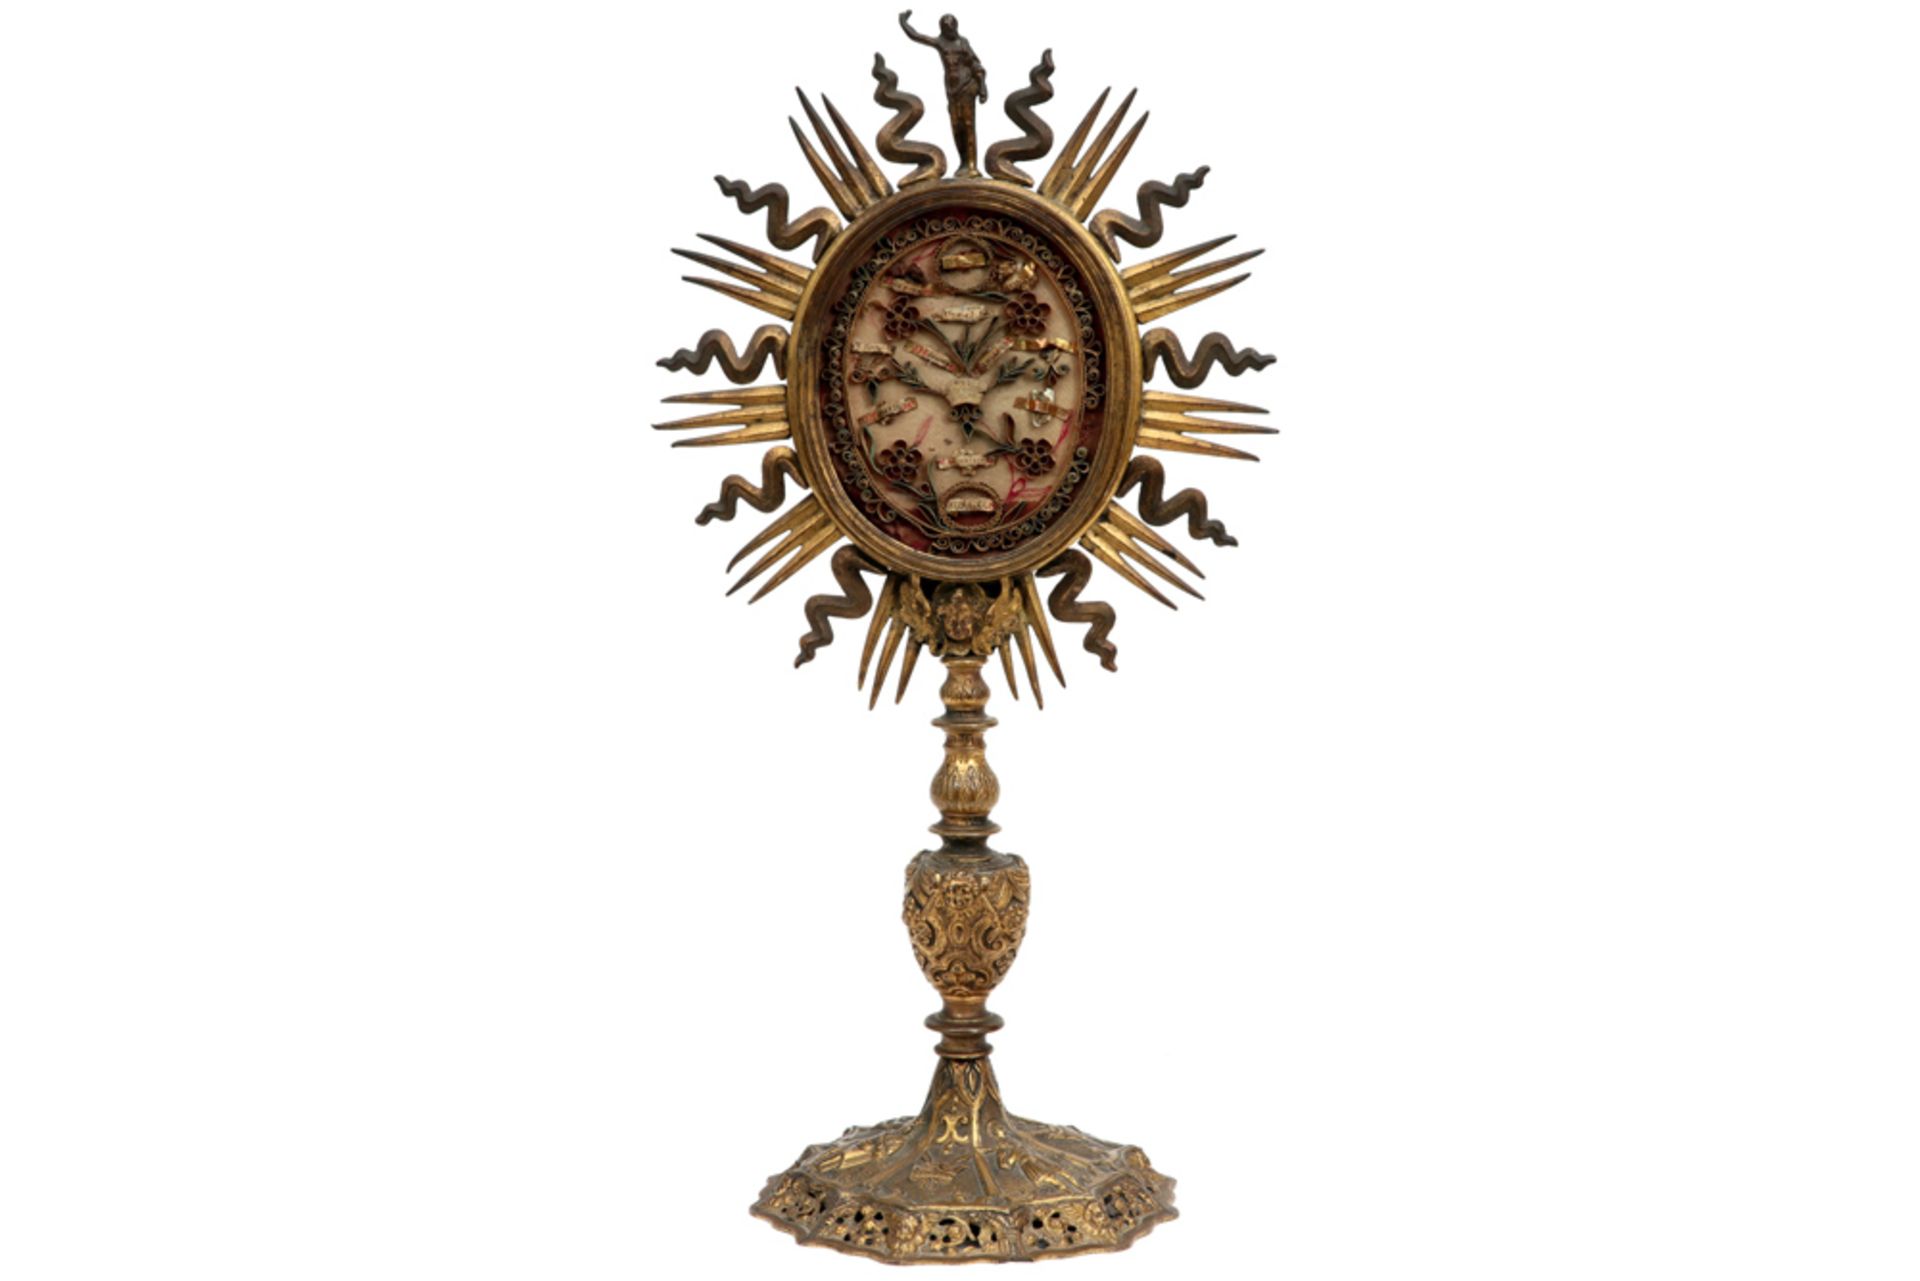 maybe 17th Cent., but certainly 18th Cent. relic holder in bronze with fine ornamentation ||